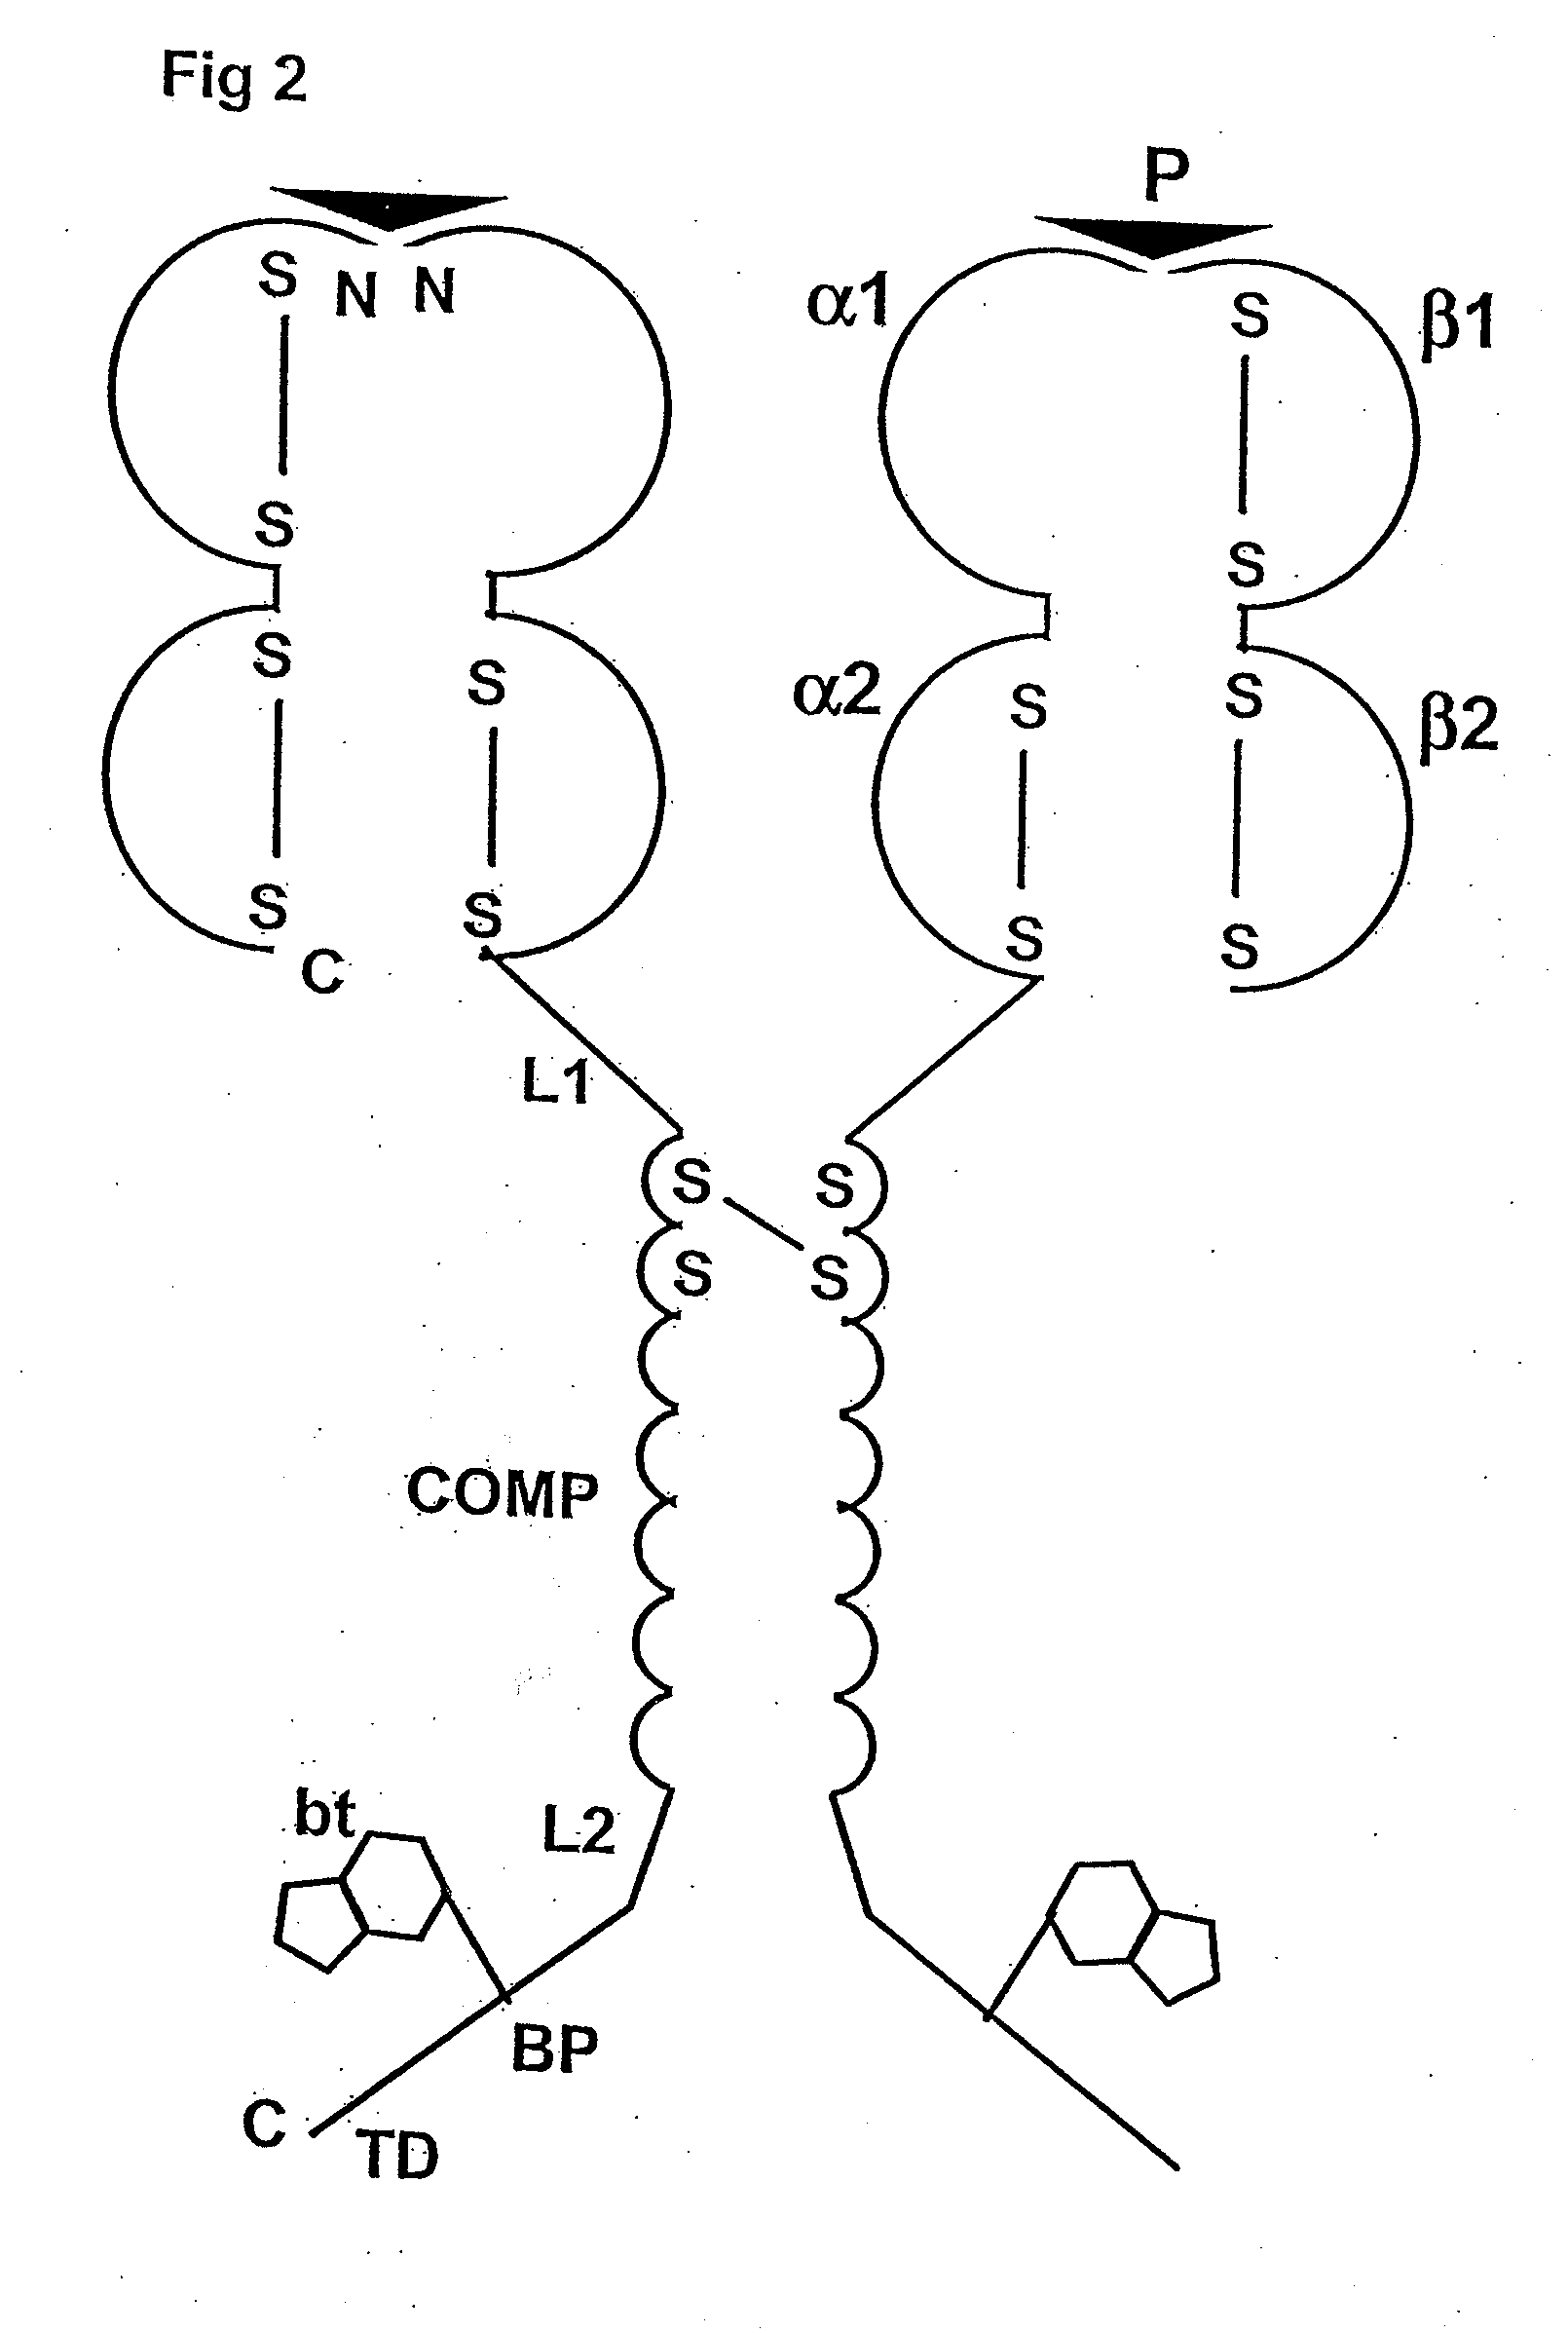 Chimeric mhc protein and oligomer thereof